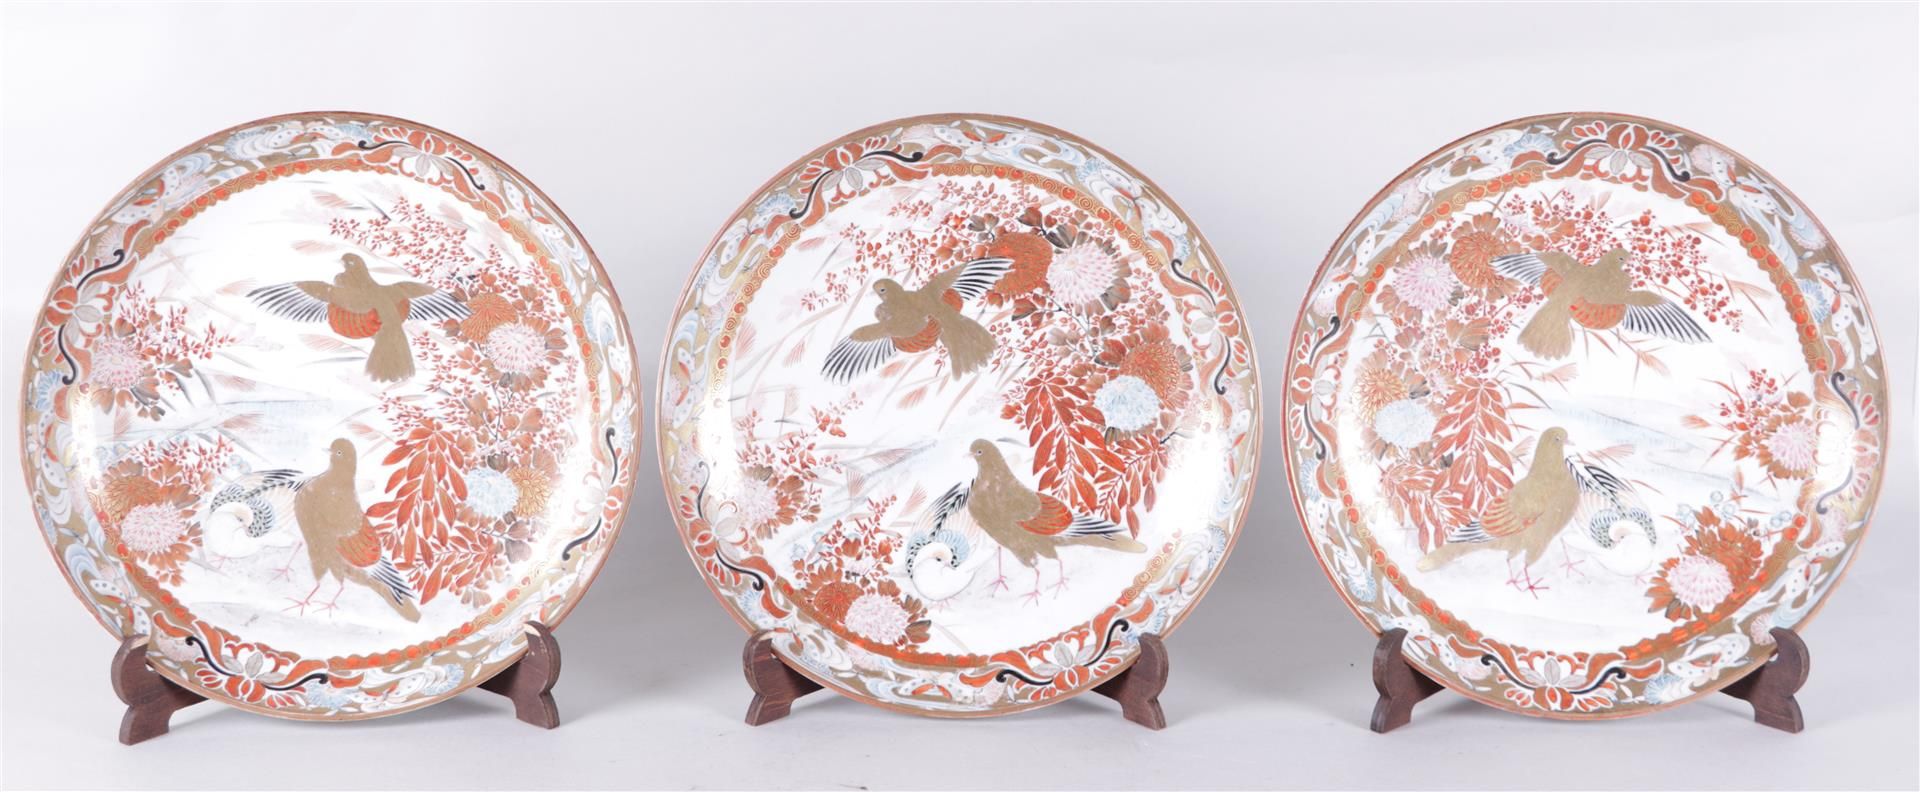 A set of three Kutani dishes decorated with flowers and birds. Japan, 19th century.
Diam. 31 cm.